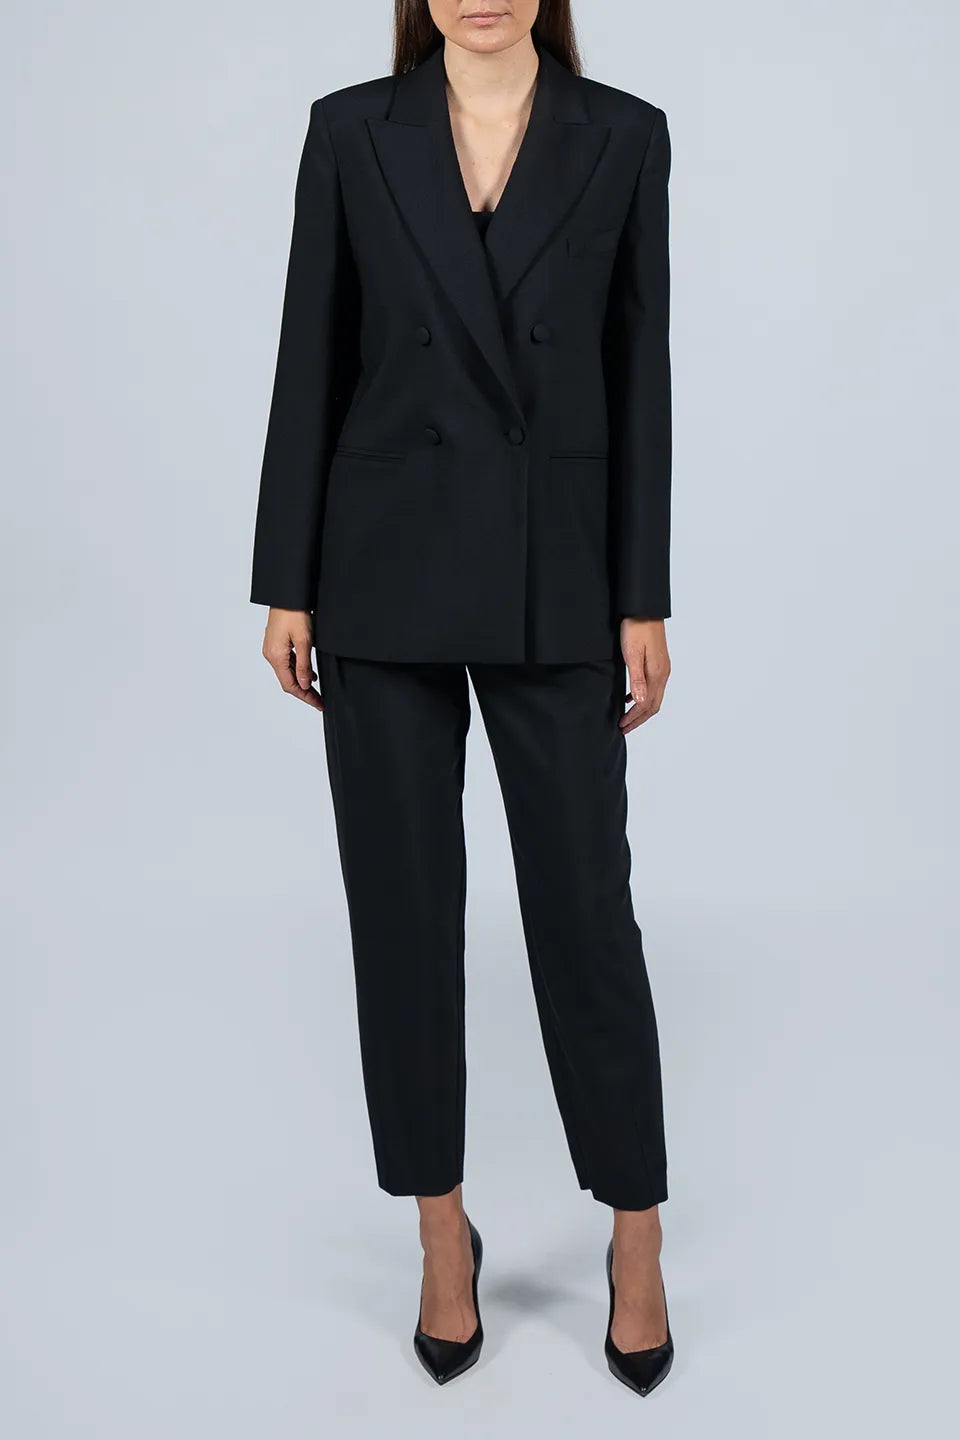 Designer Black Women blazers, Jacket, shop online with free delivery in UAE. Product gallery 2